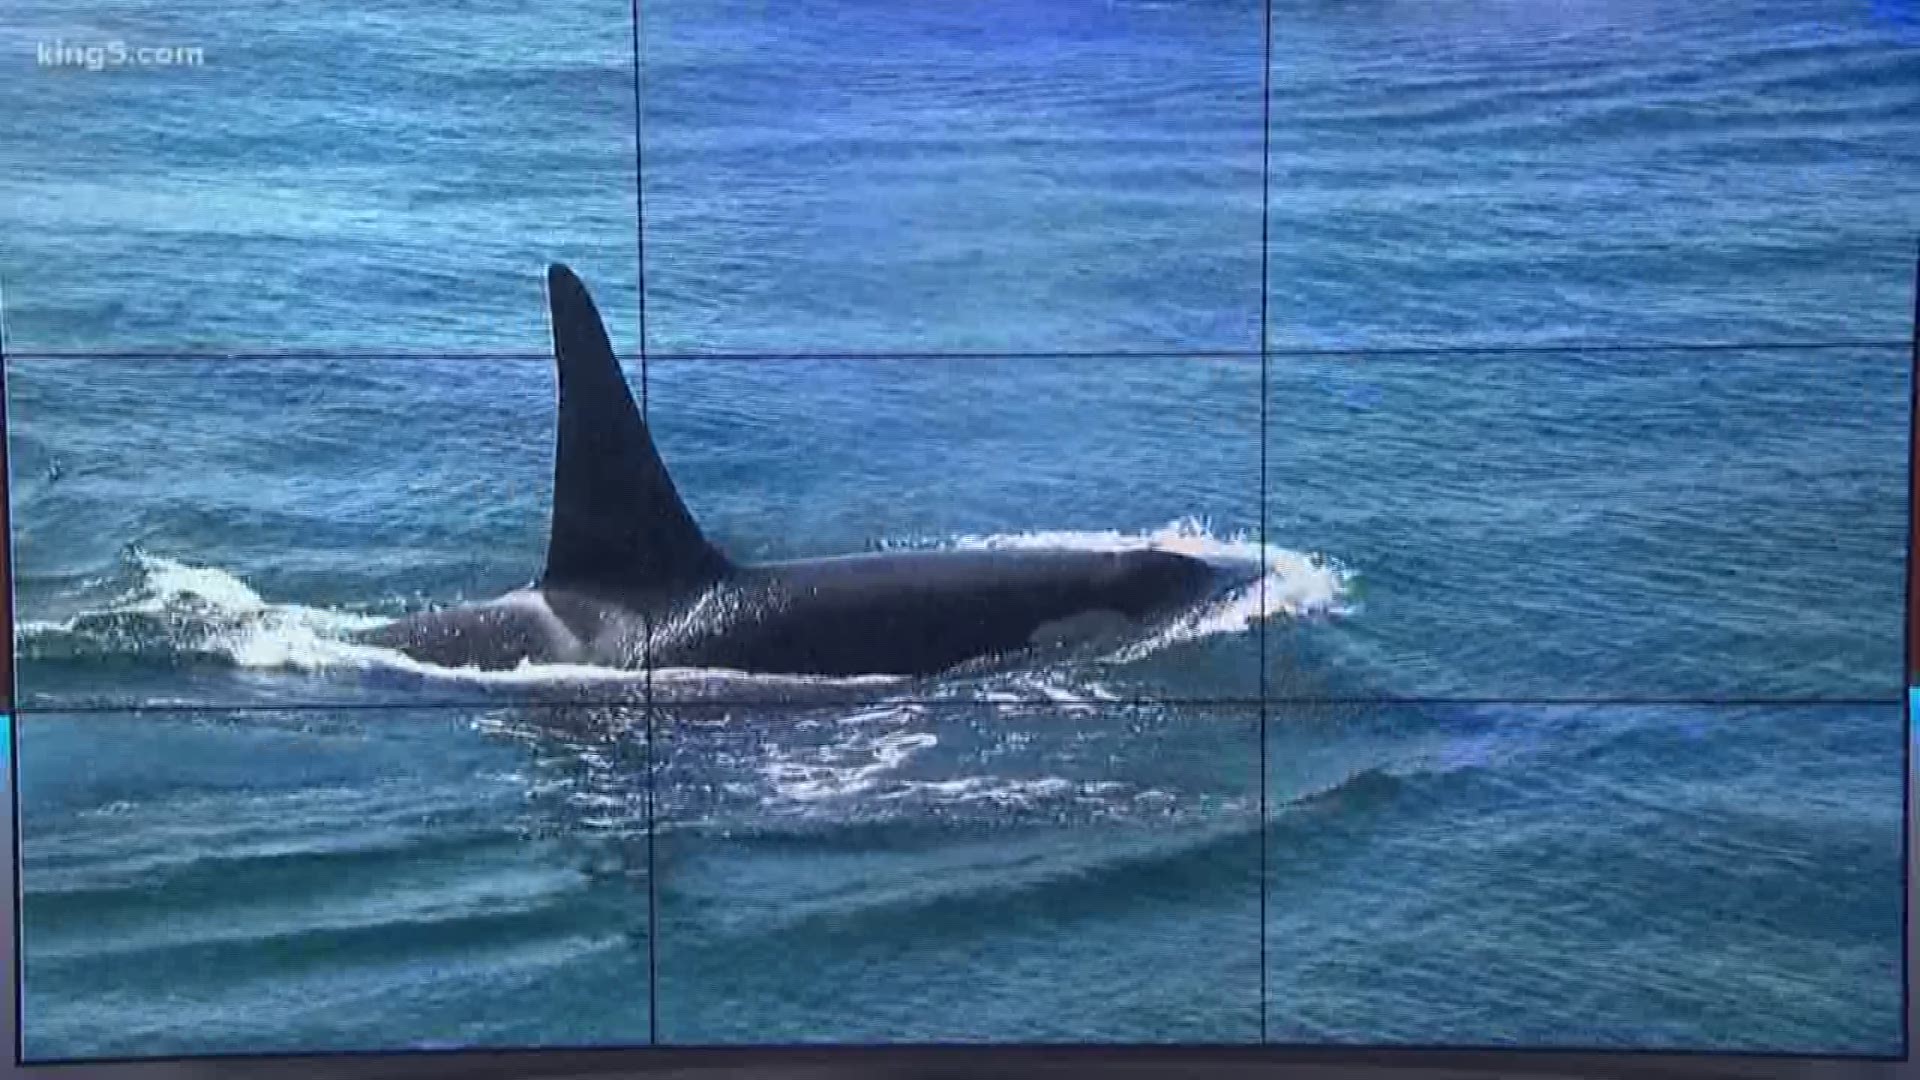 The Center for Whale Research declared three more Southern Resident killer whales dead on August 6, 2019. That brings the total population down to 73. KING 5's Alison Morrow reports with orca expert Ken Balcomb.